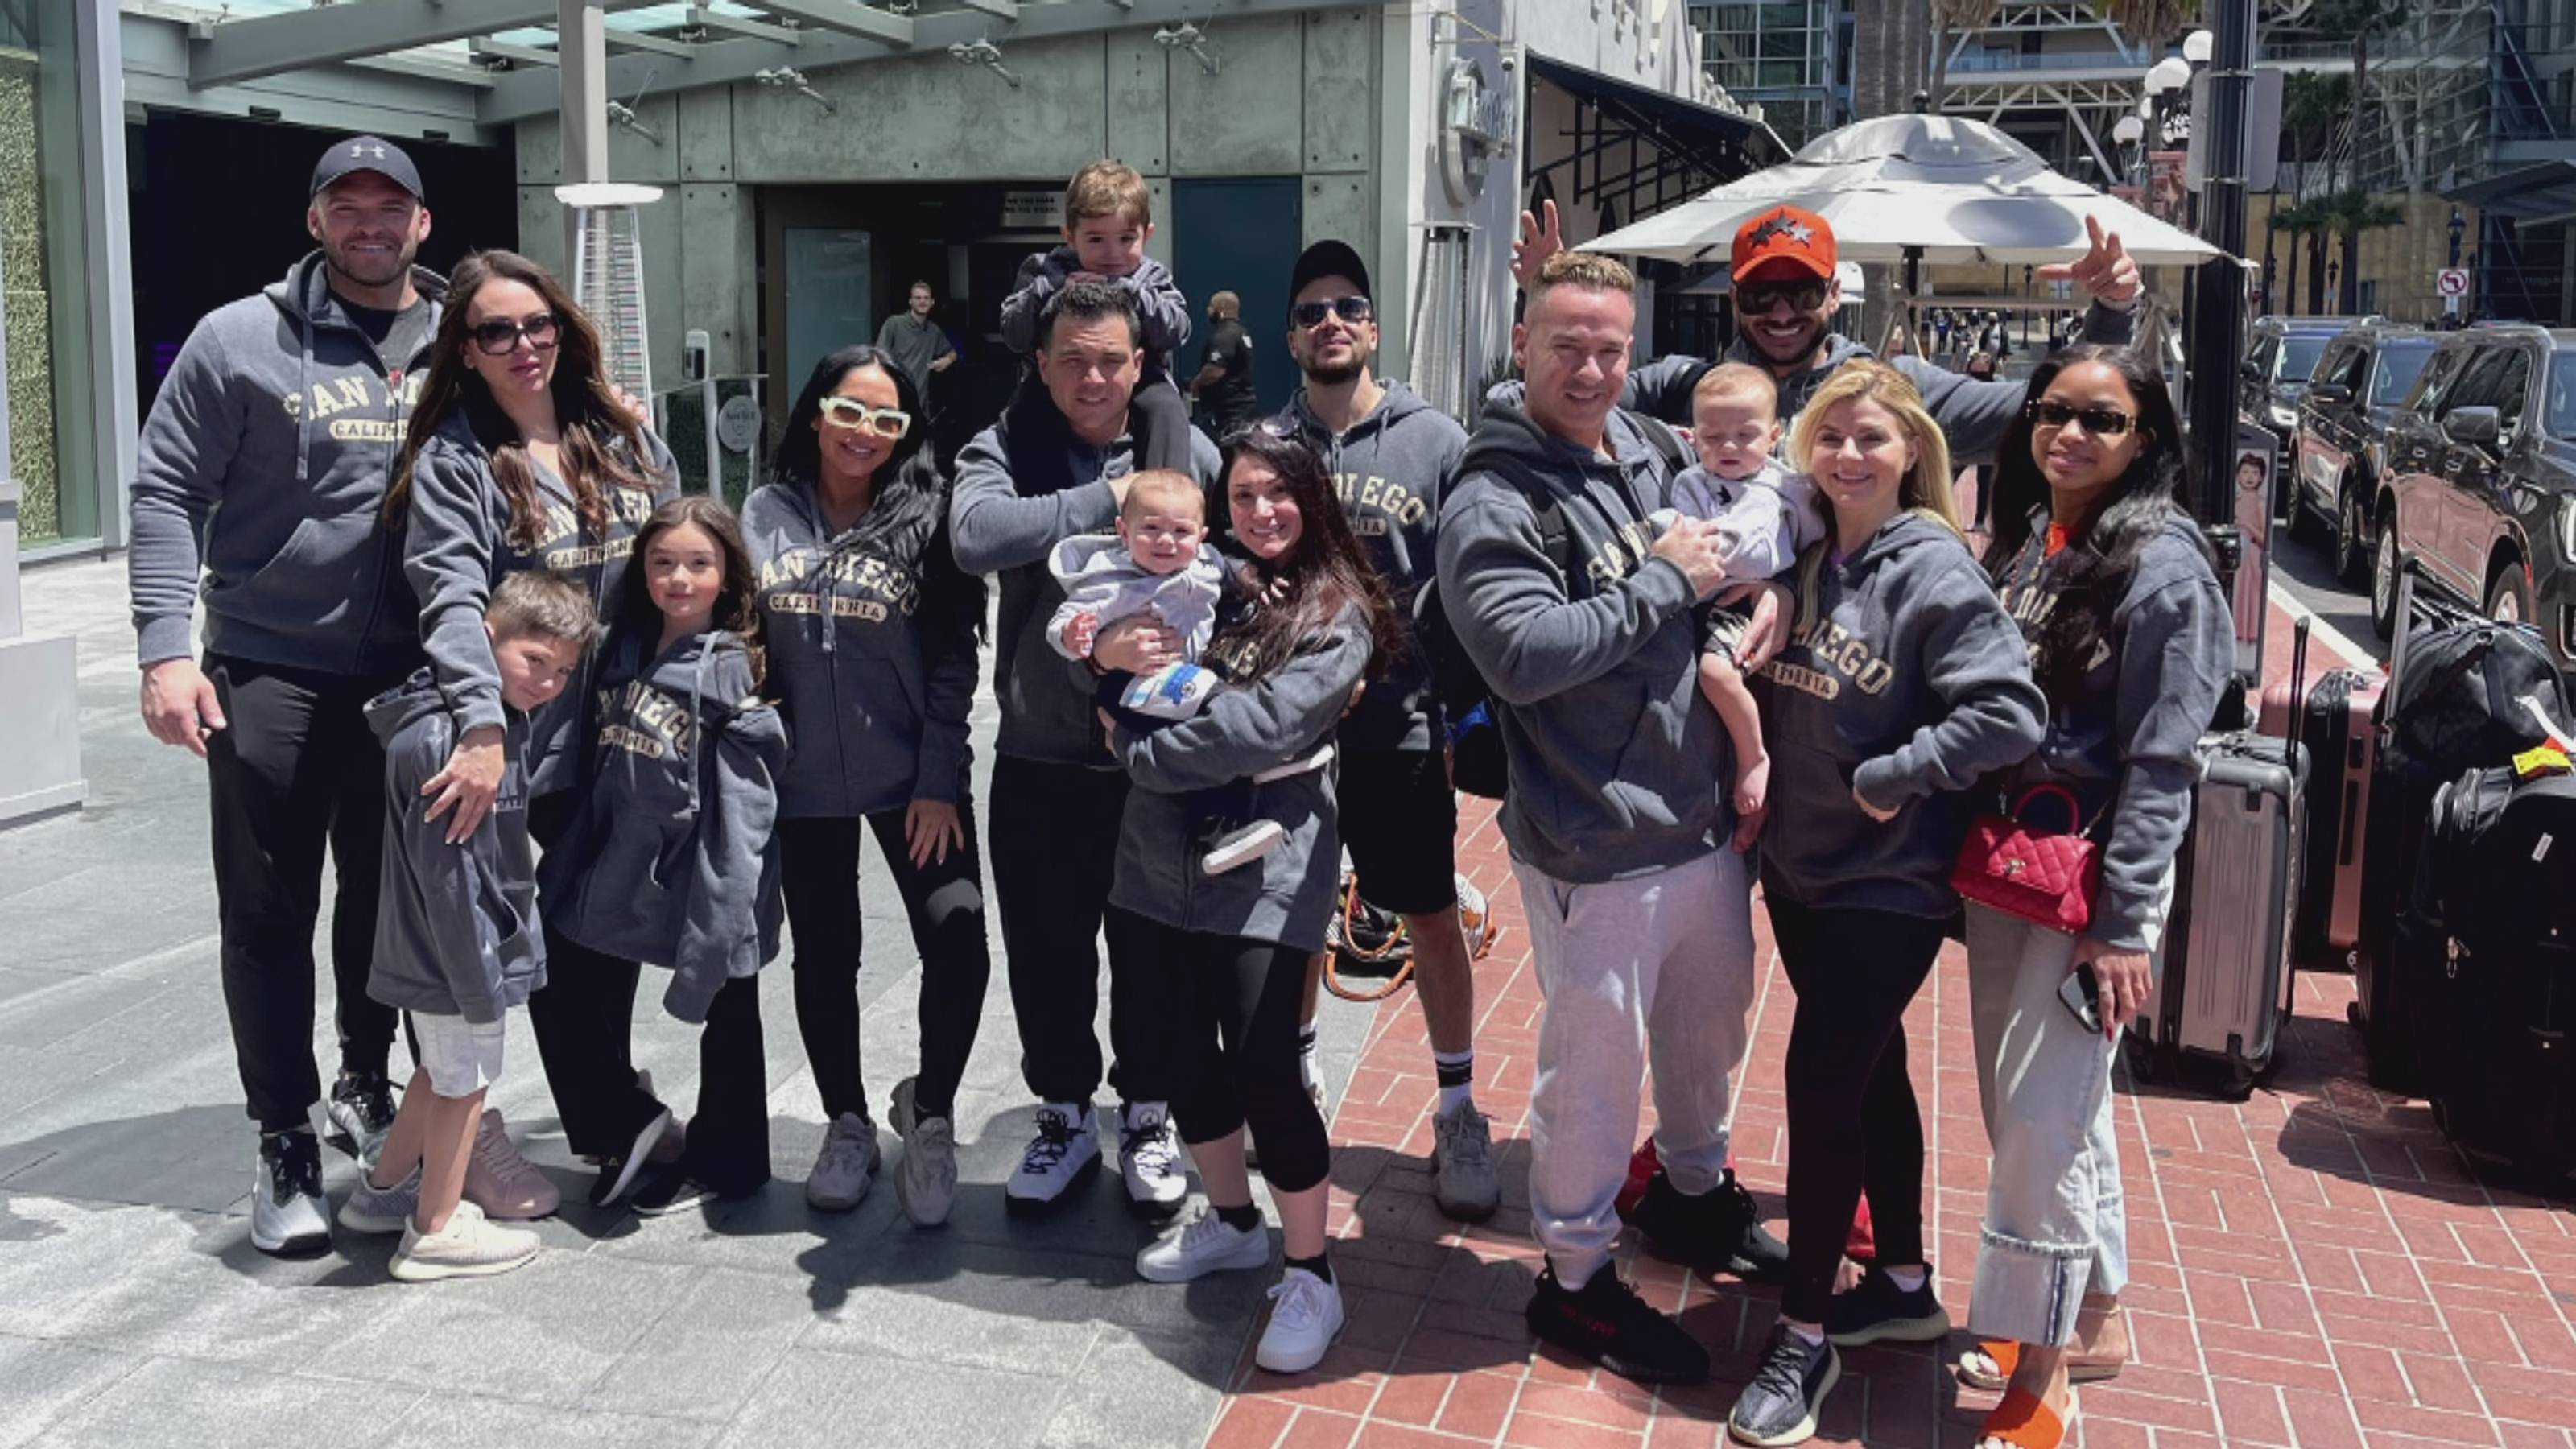 The cast of 'Jersey Shore: Family Vacation,' who will participate in a reunion episode on Oct. 20, in San Diego